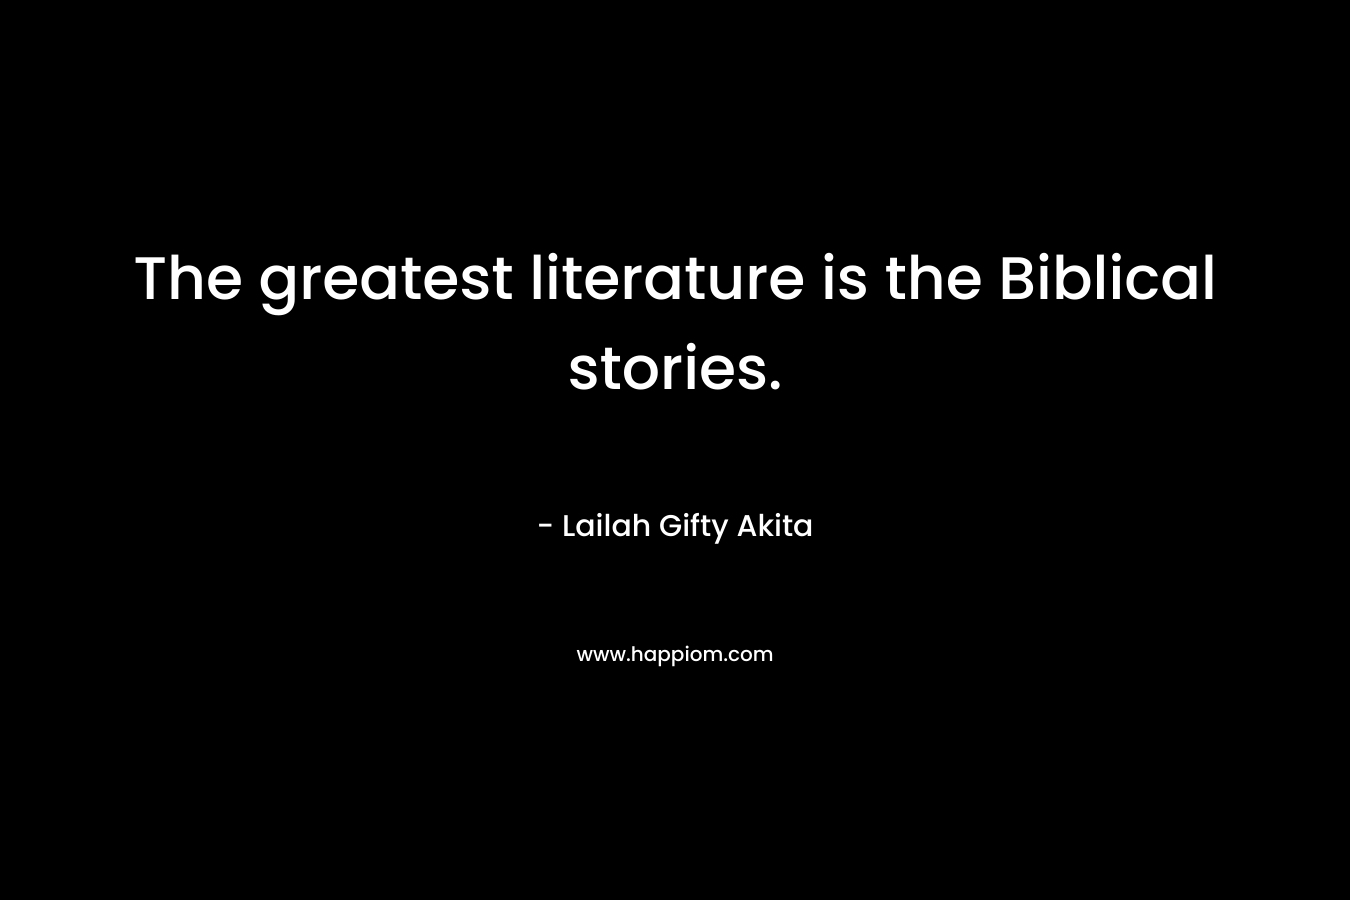 The greatest literature is the Biblical stories.